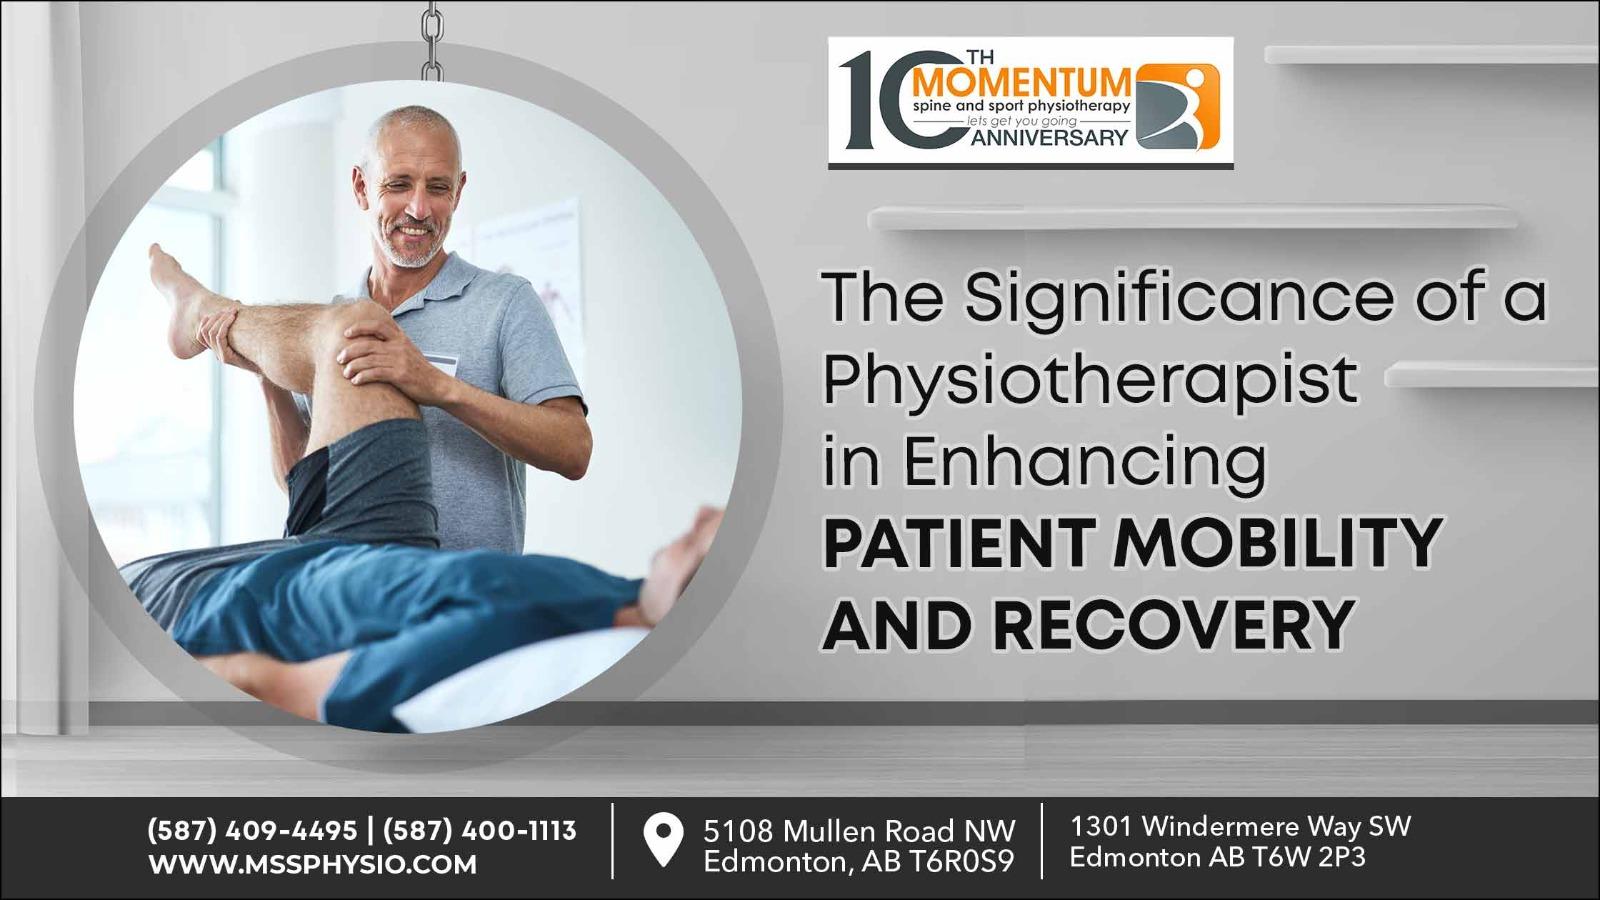 The Significance of a Physiotherapist in Enhancing Patient Mobility and Recovery